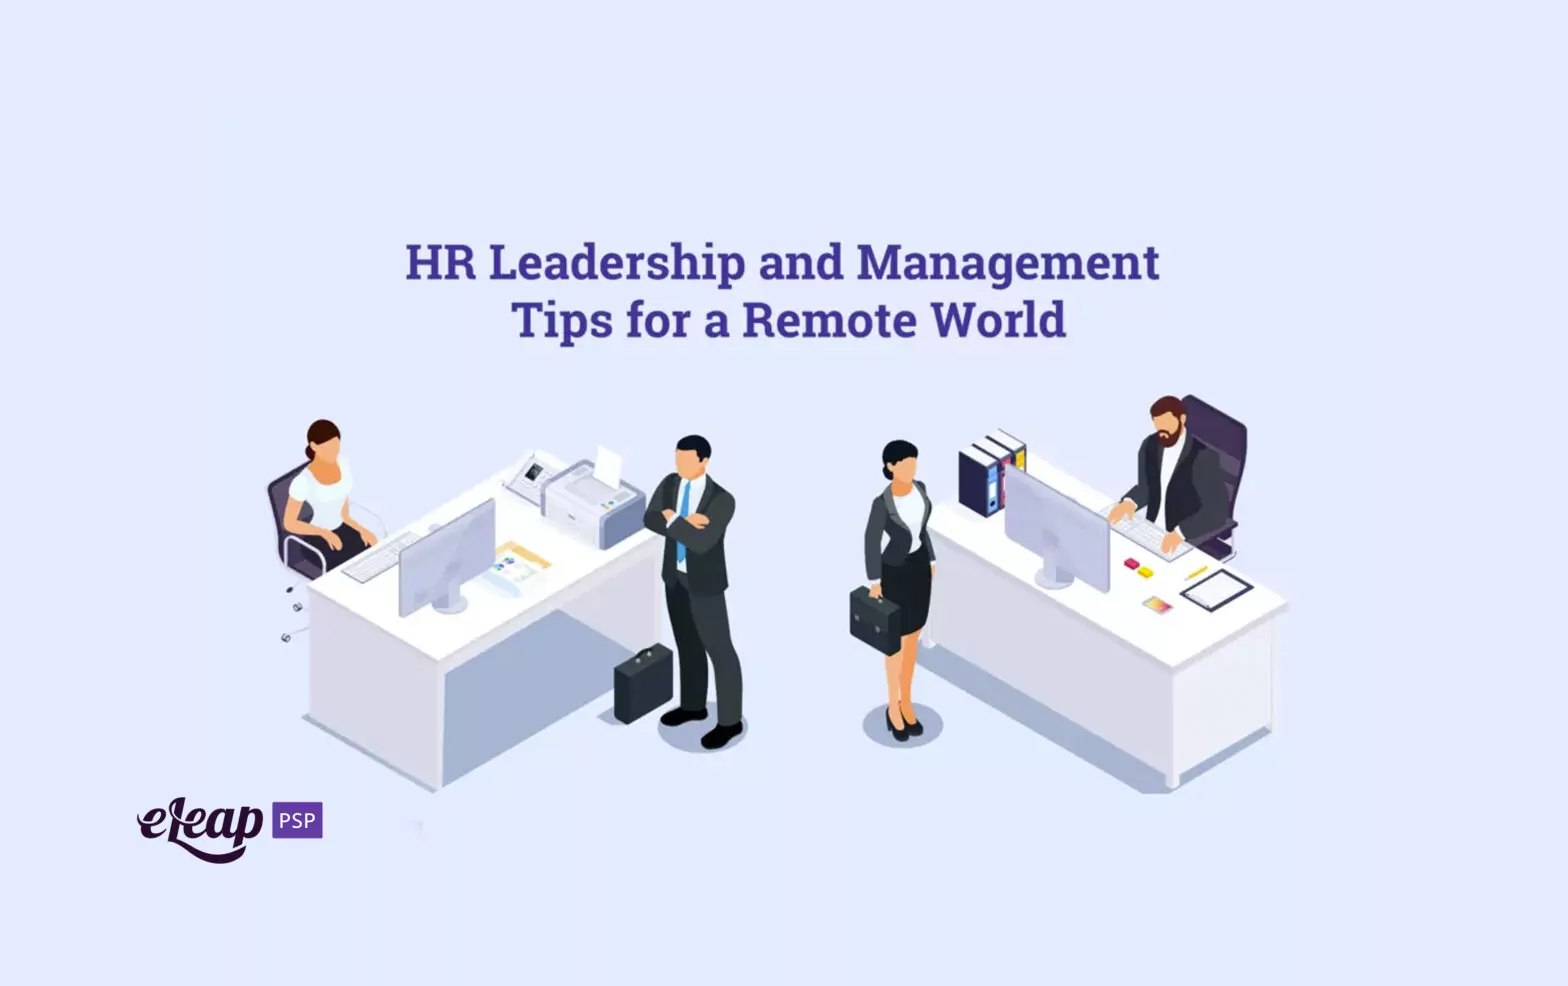 HR Leadership and Management Tips for a Remote World